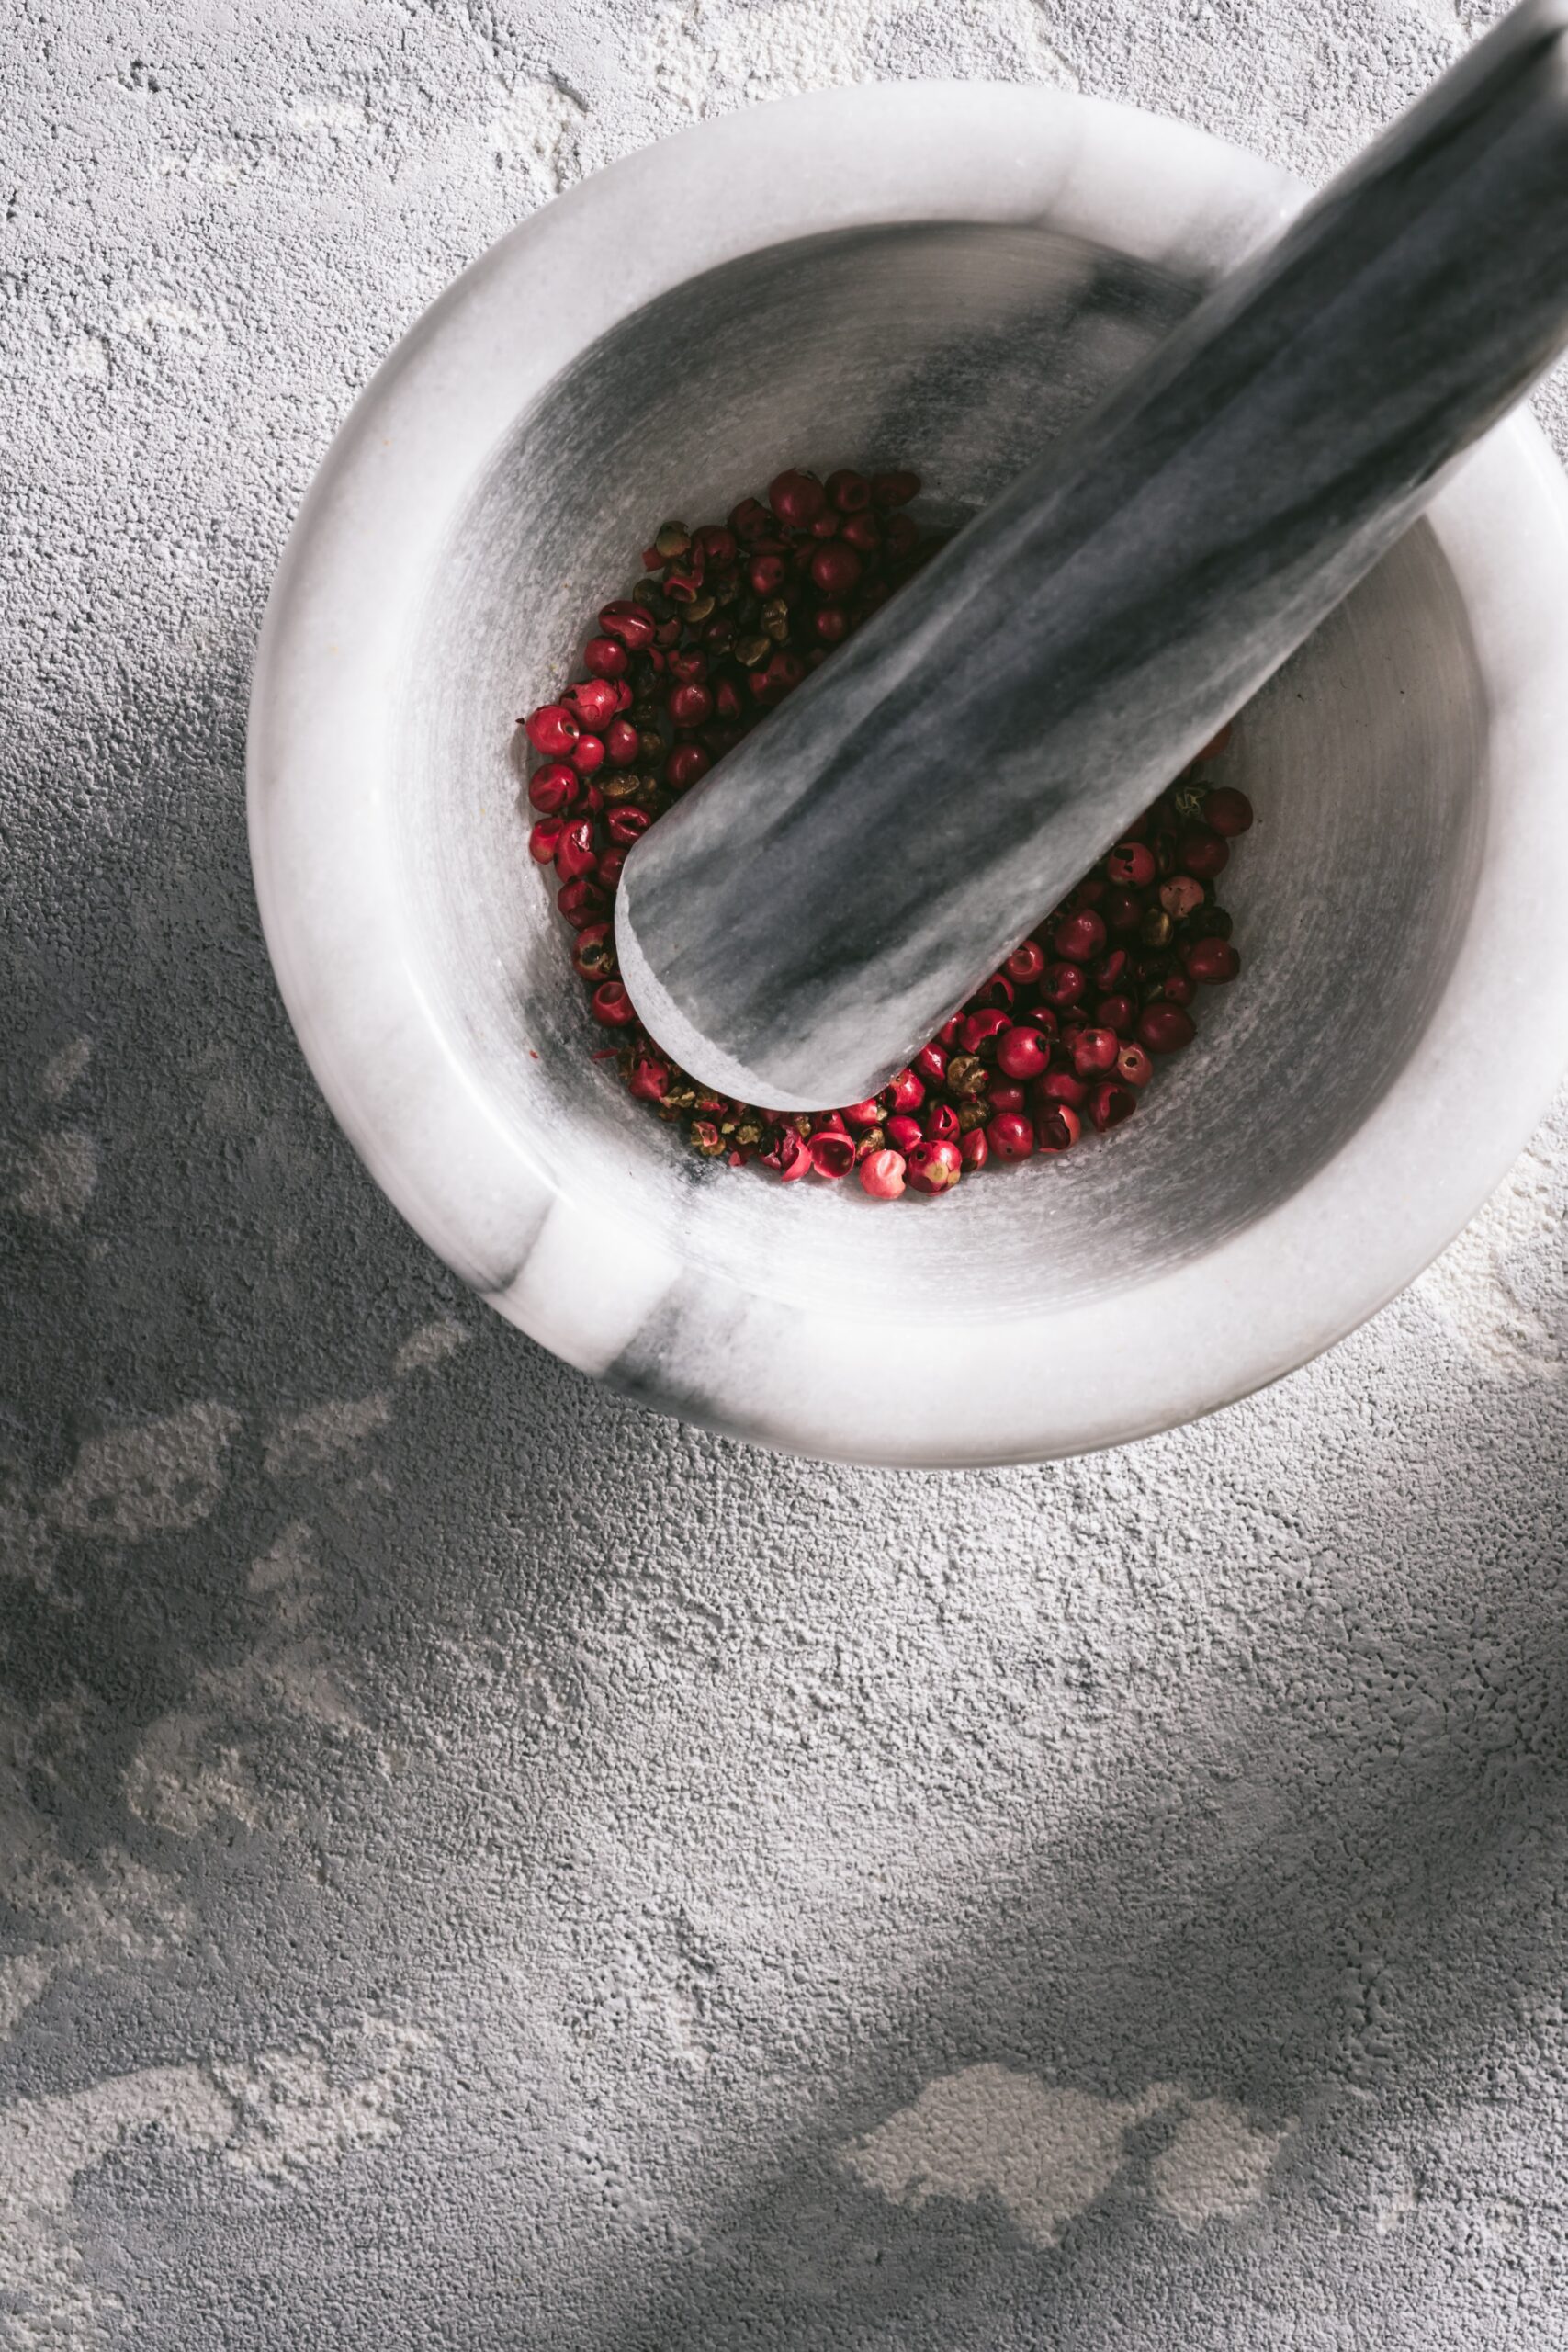 Pink Peppercorn in a Mortar with its Pestle